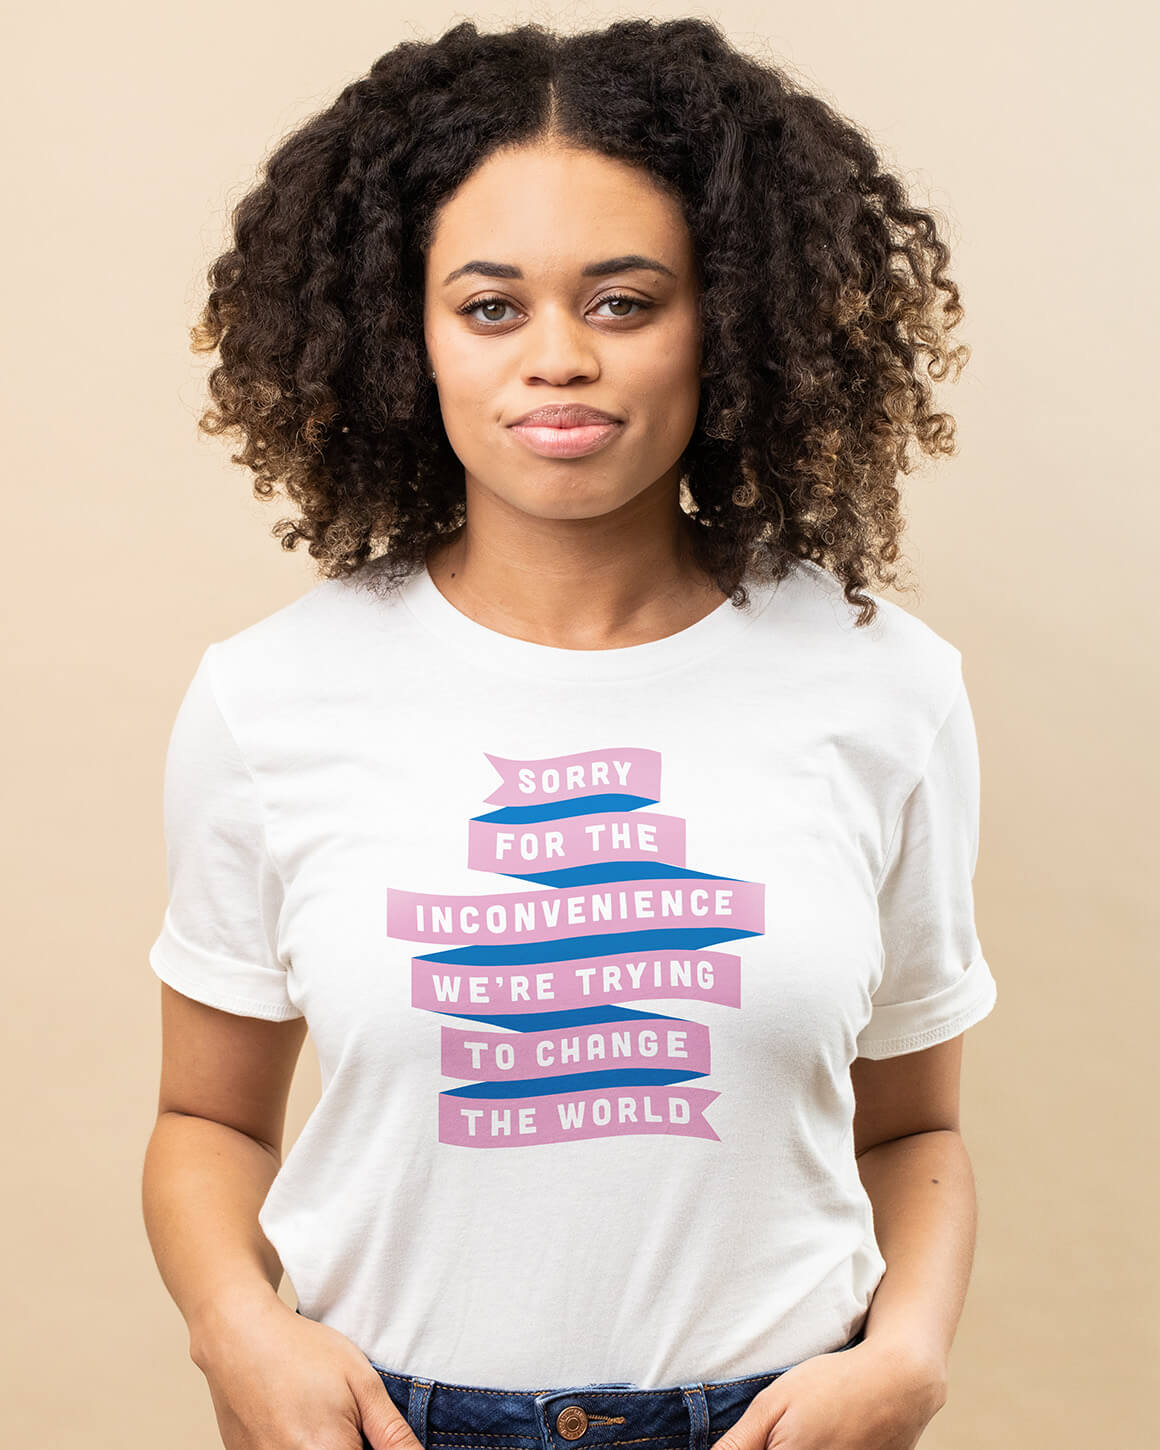 Smiling woman wearing a premium white t-shirt with two color feminist design